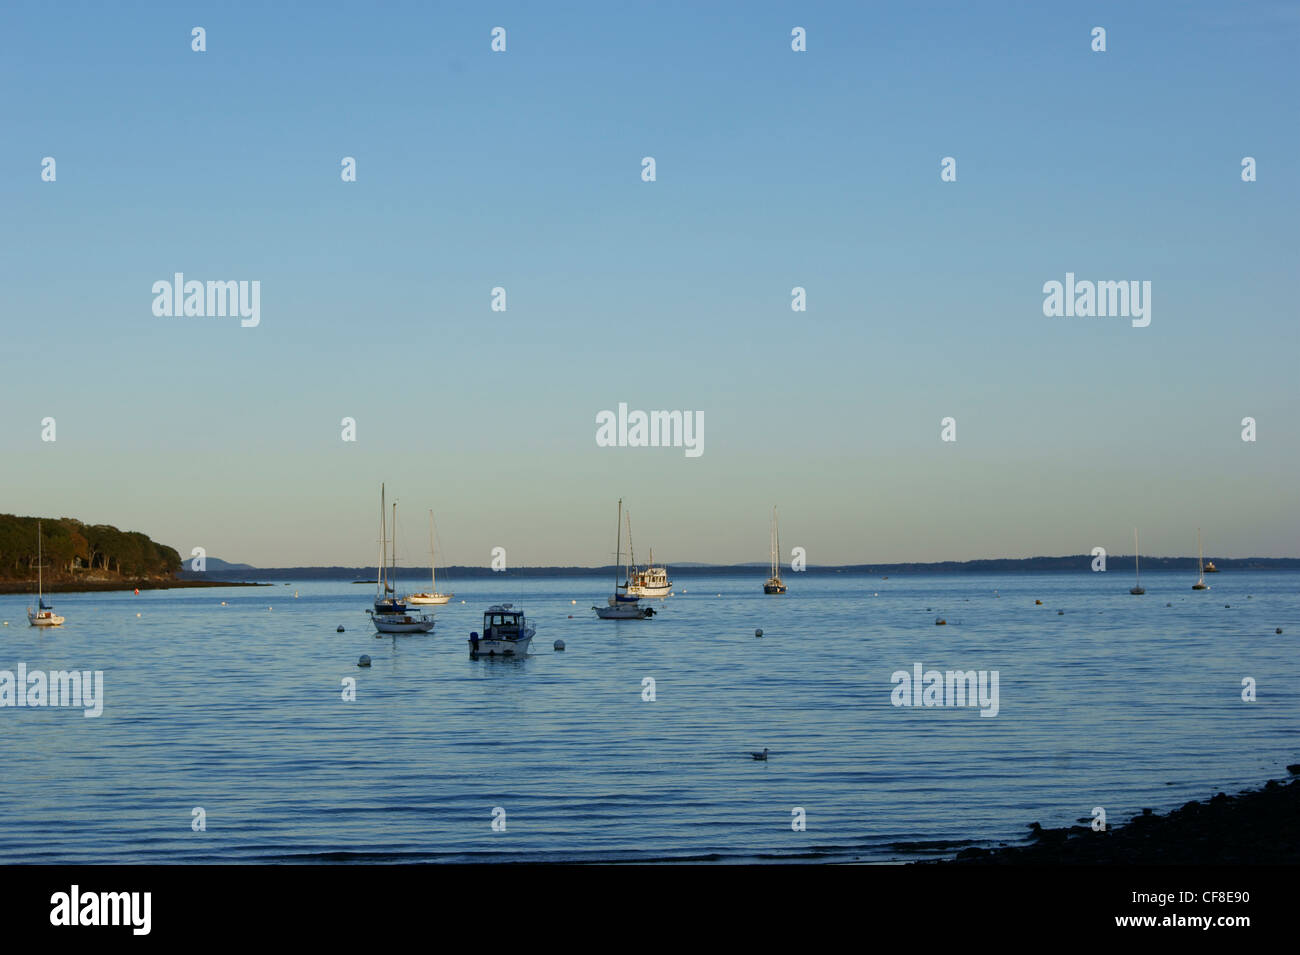 Boats at anchor in the inner harbor at sunset, Belfast, Maine. Stock Photo